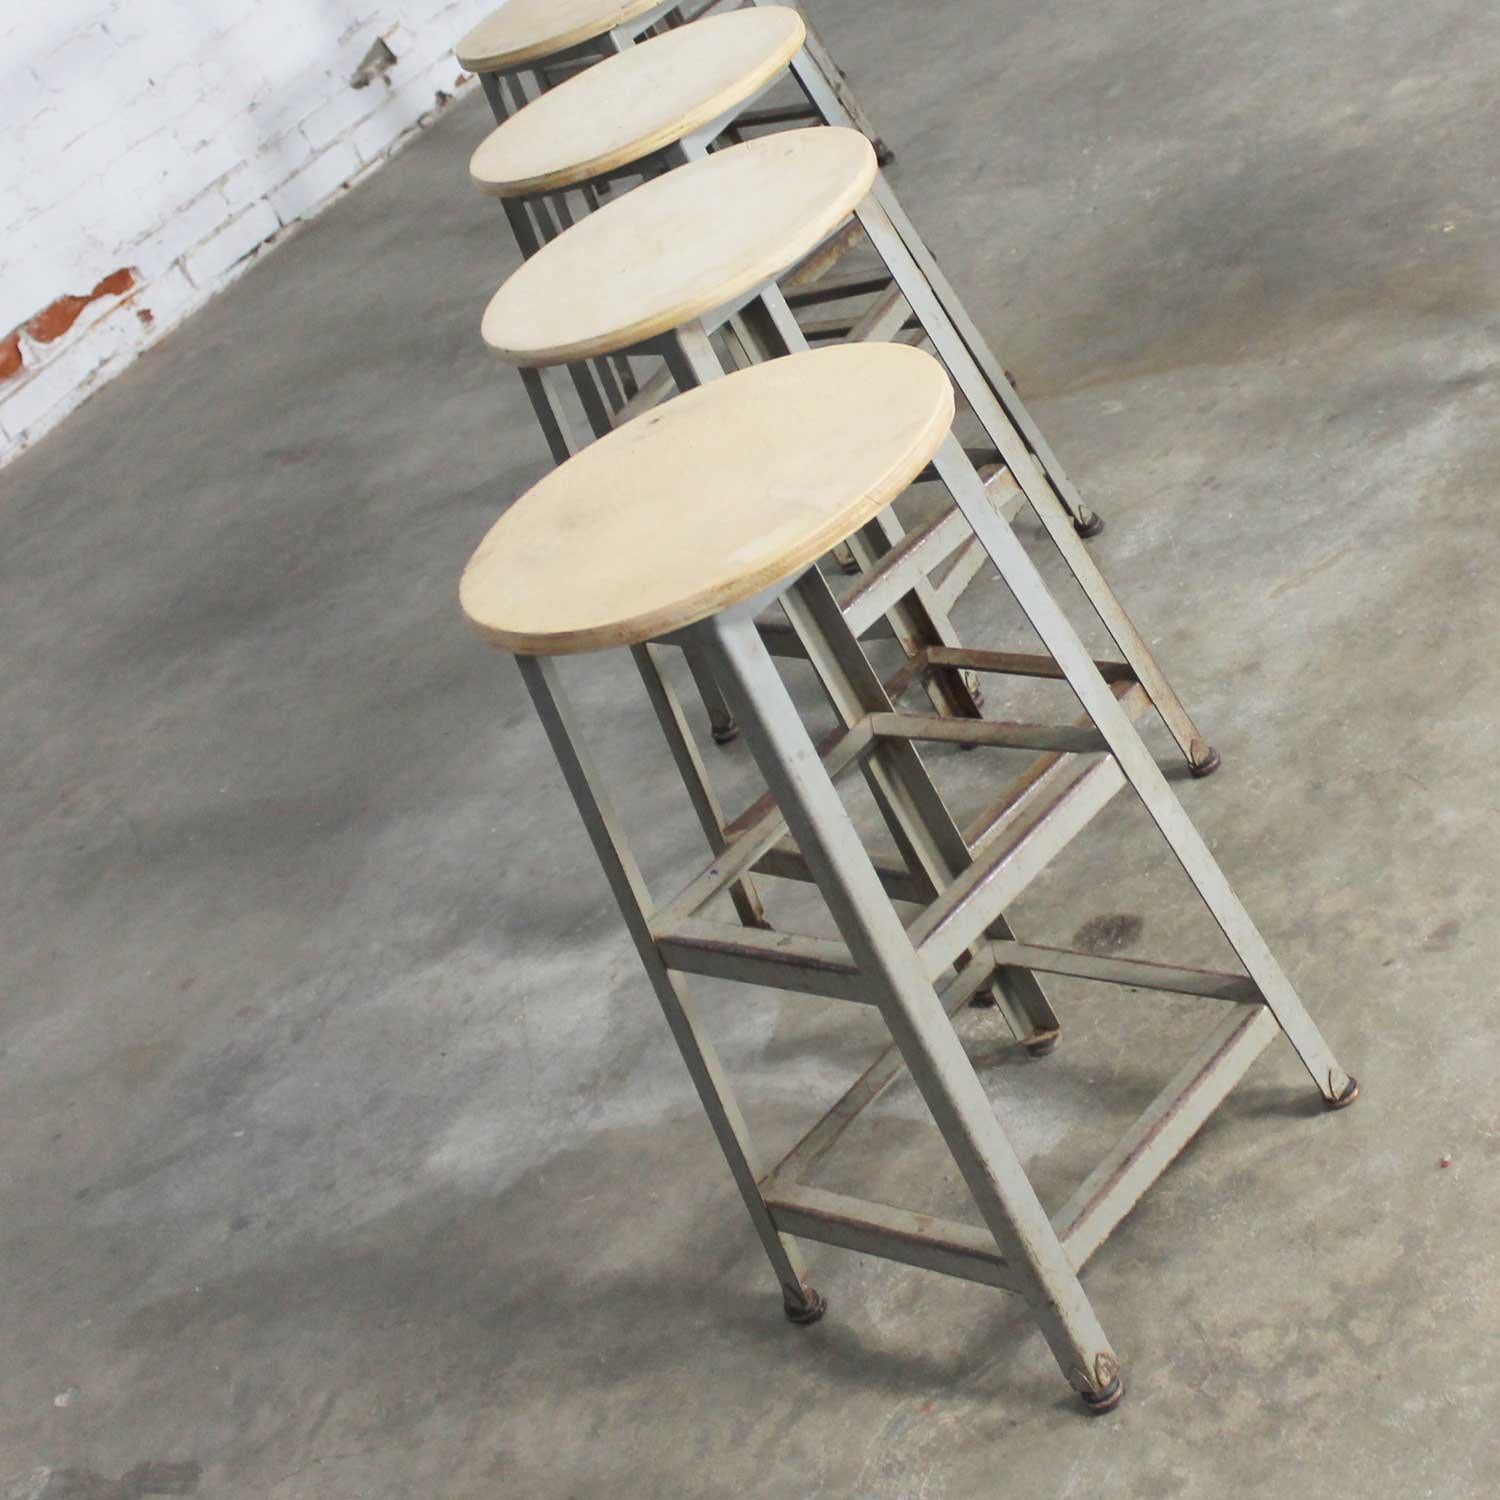 Industrial Counter Height Stools Vintage Patinated Steel Distressed Wood Seats (Industriell)